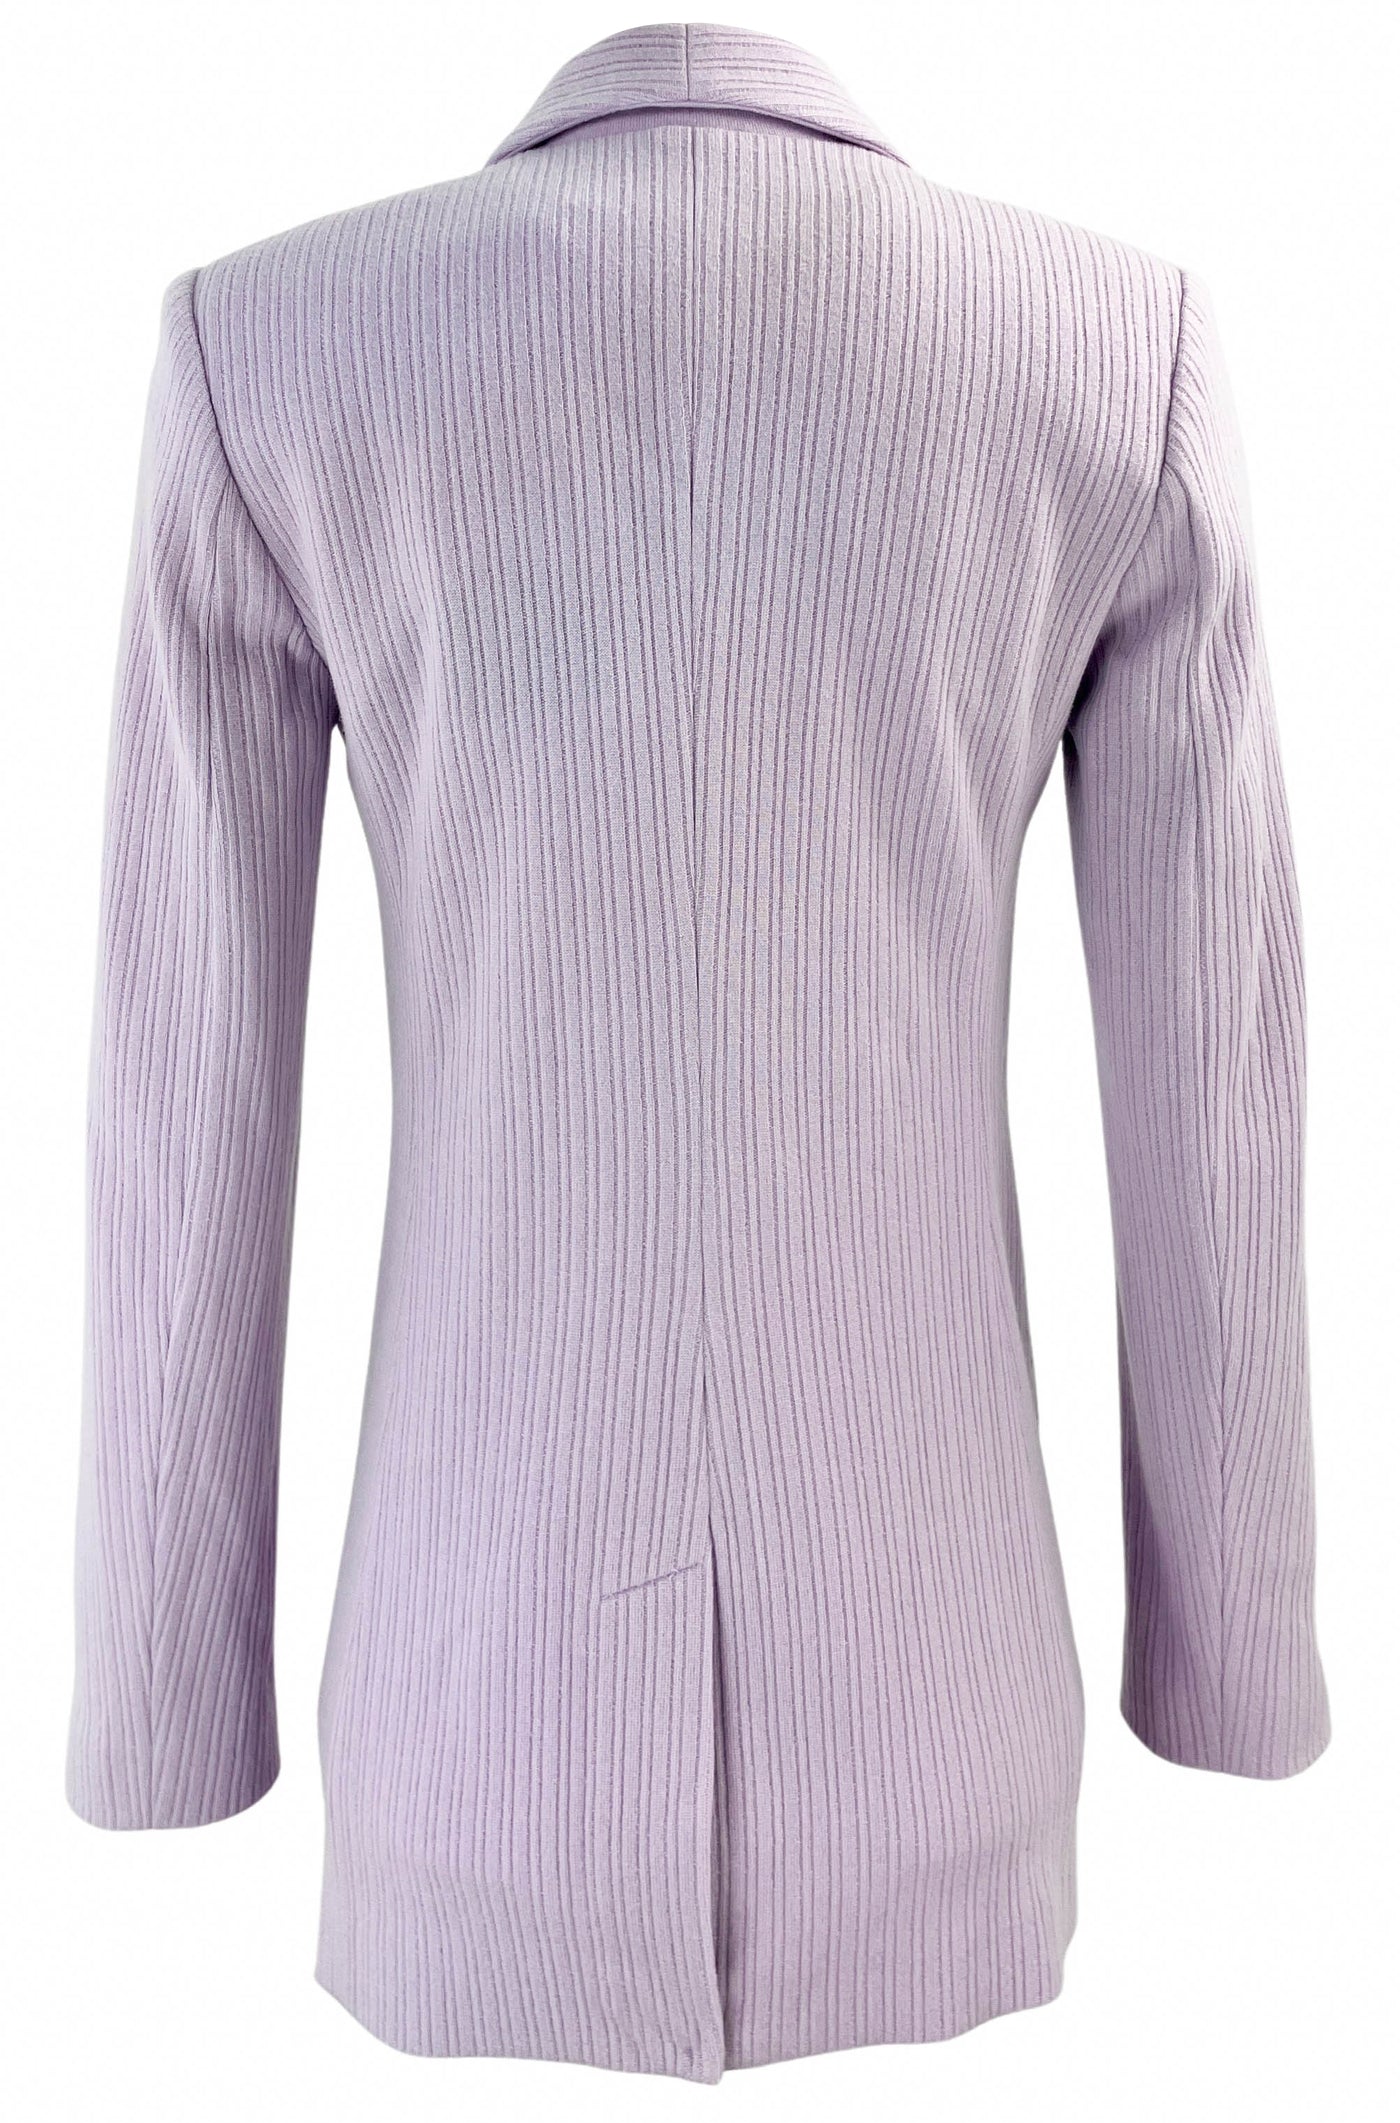 Nells Nelson Odette Blazer in Lavender - Discounts on Nells Nelson at UAL